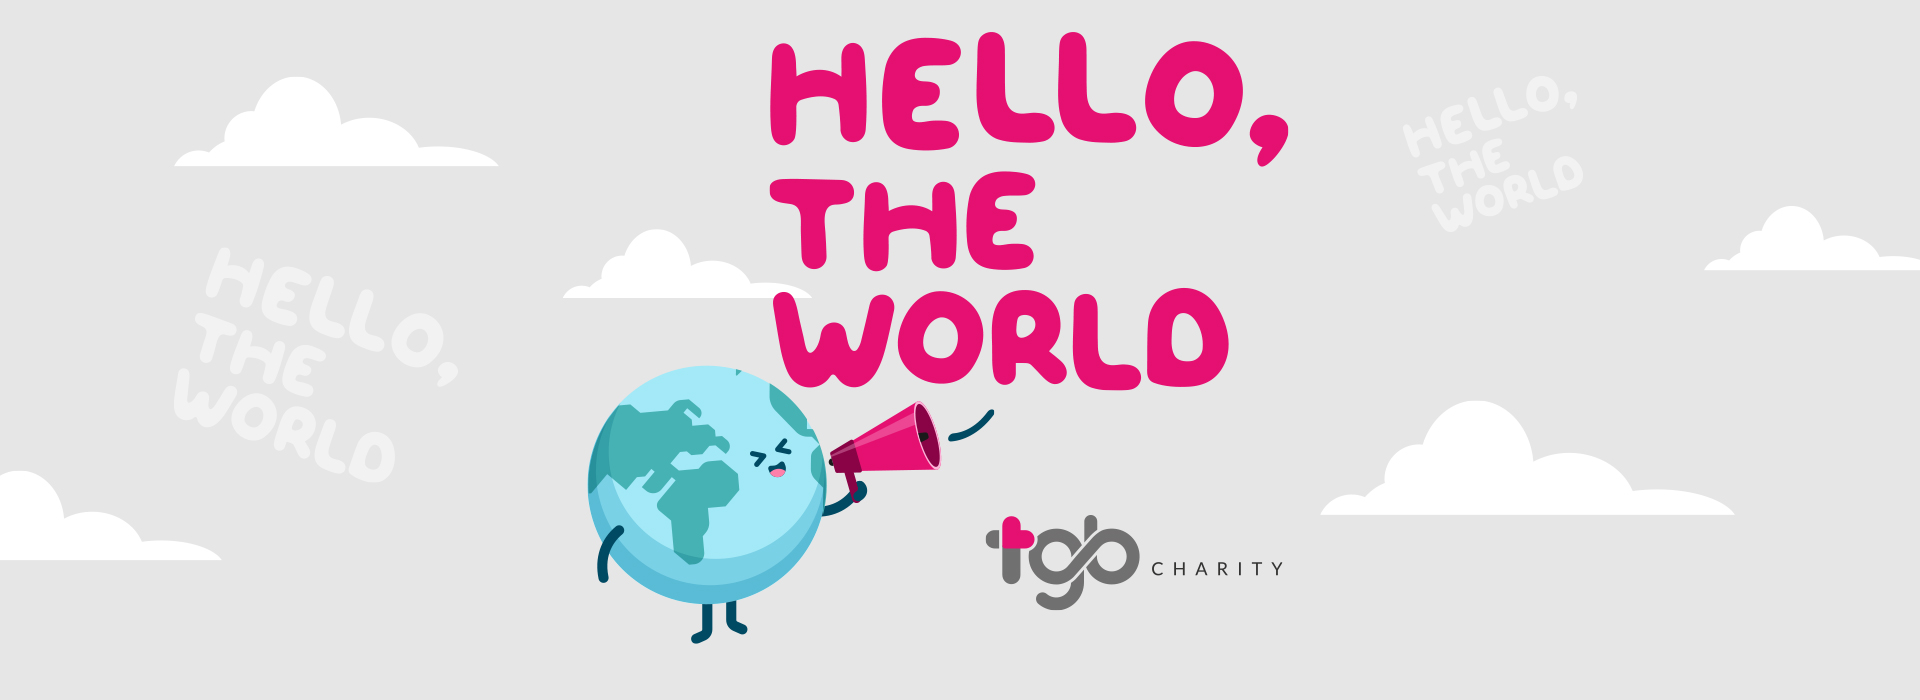 TGB Charity's new website is ready to say HELLO to all of you!